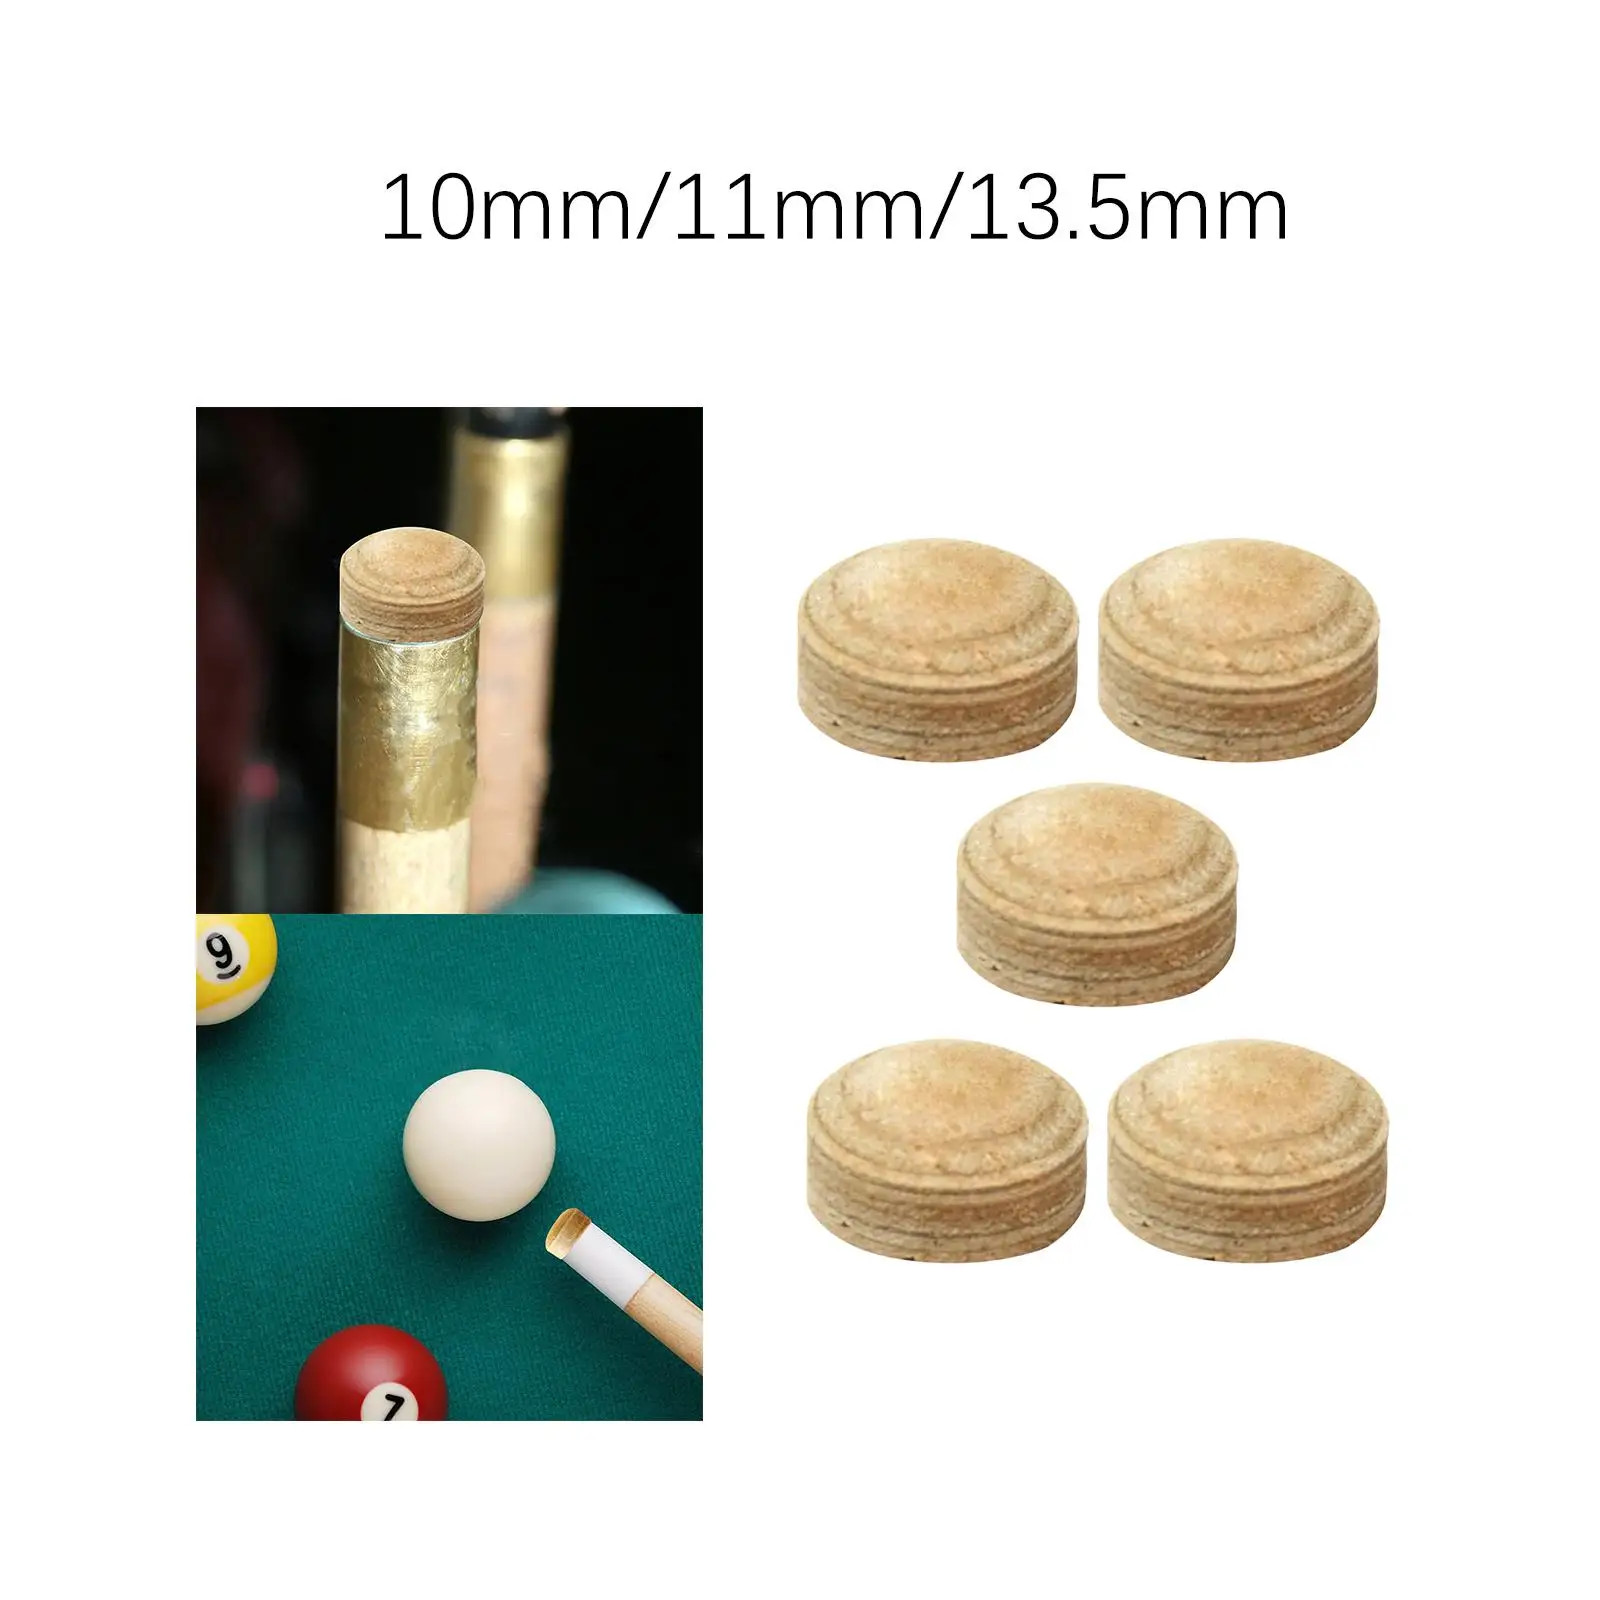 5 Pieces Table Billiards Pool Cue Tips Layered Tips Billiard Game Protector for Club Billiard Players Pub Home Billiards Room